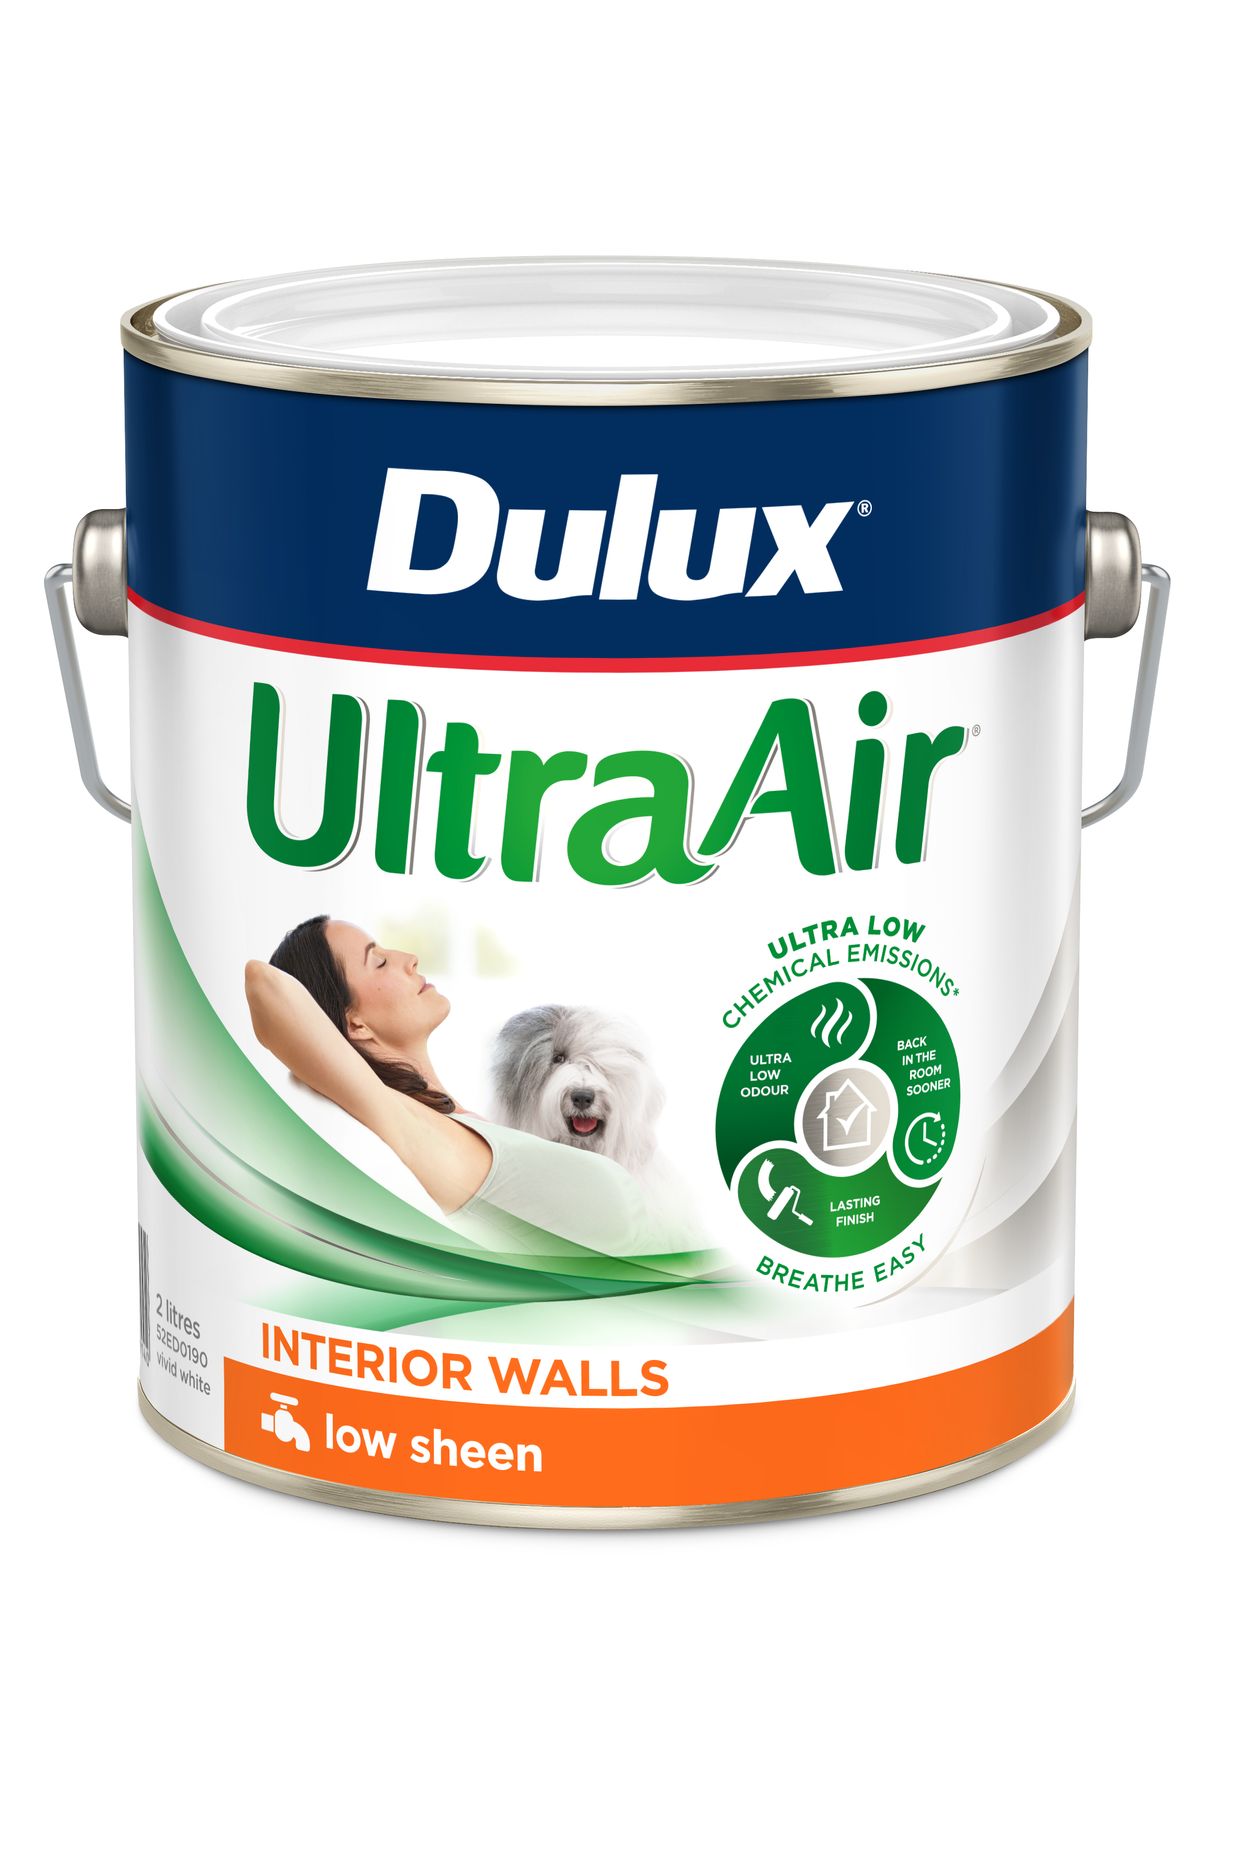 Dulux UltraAir® for environment-friendly interiors through low volumes of volatile organic compounds